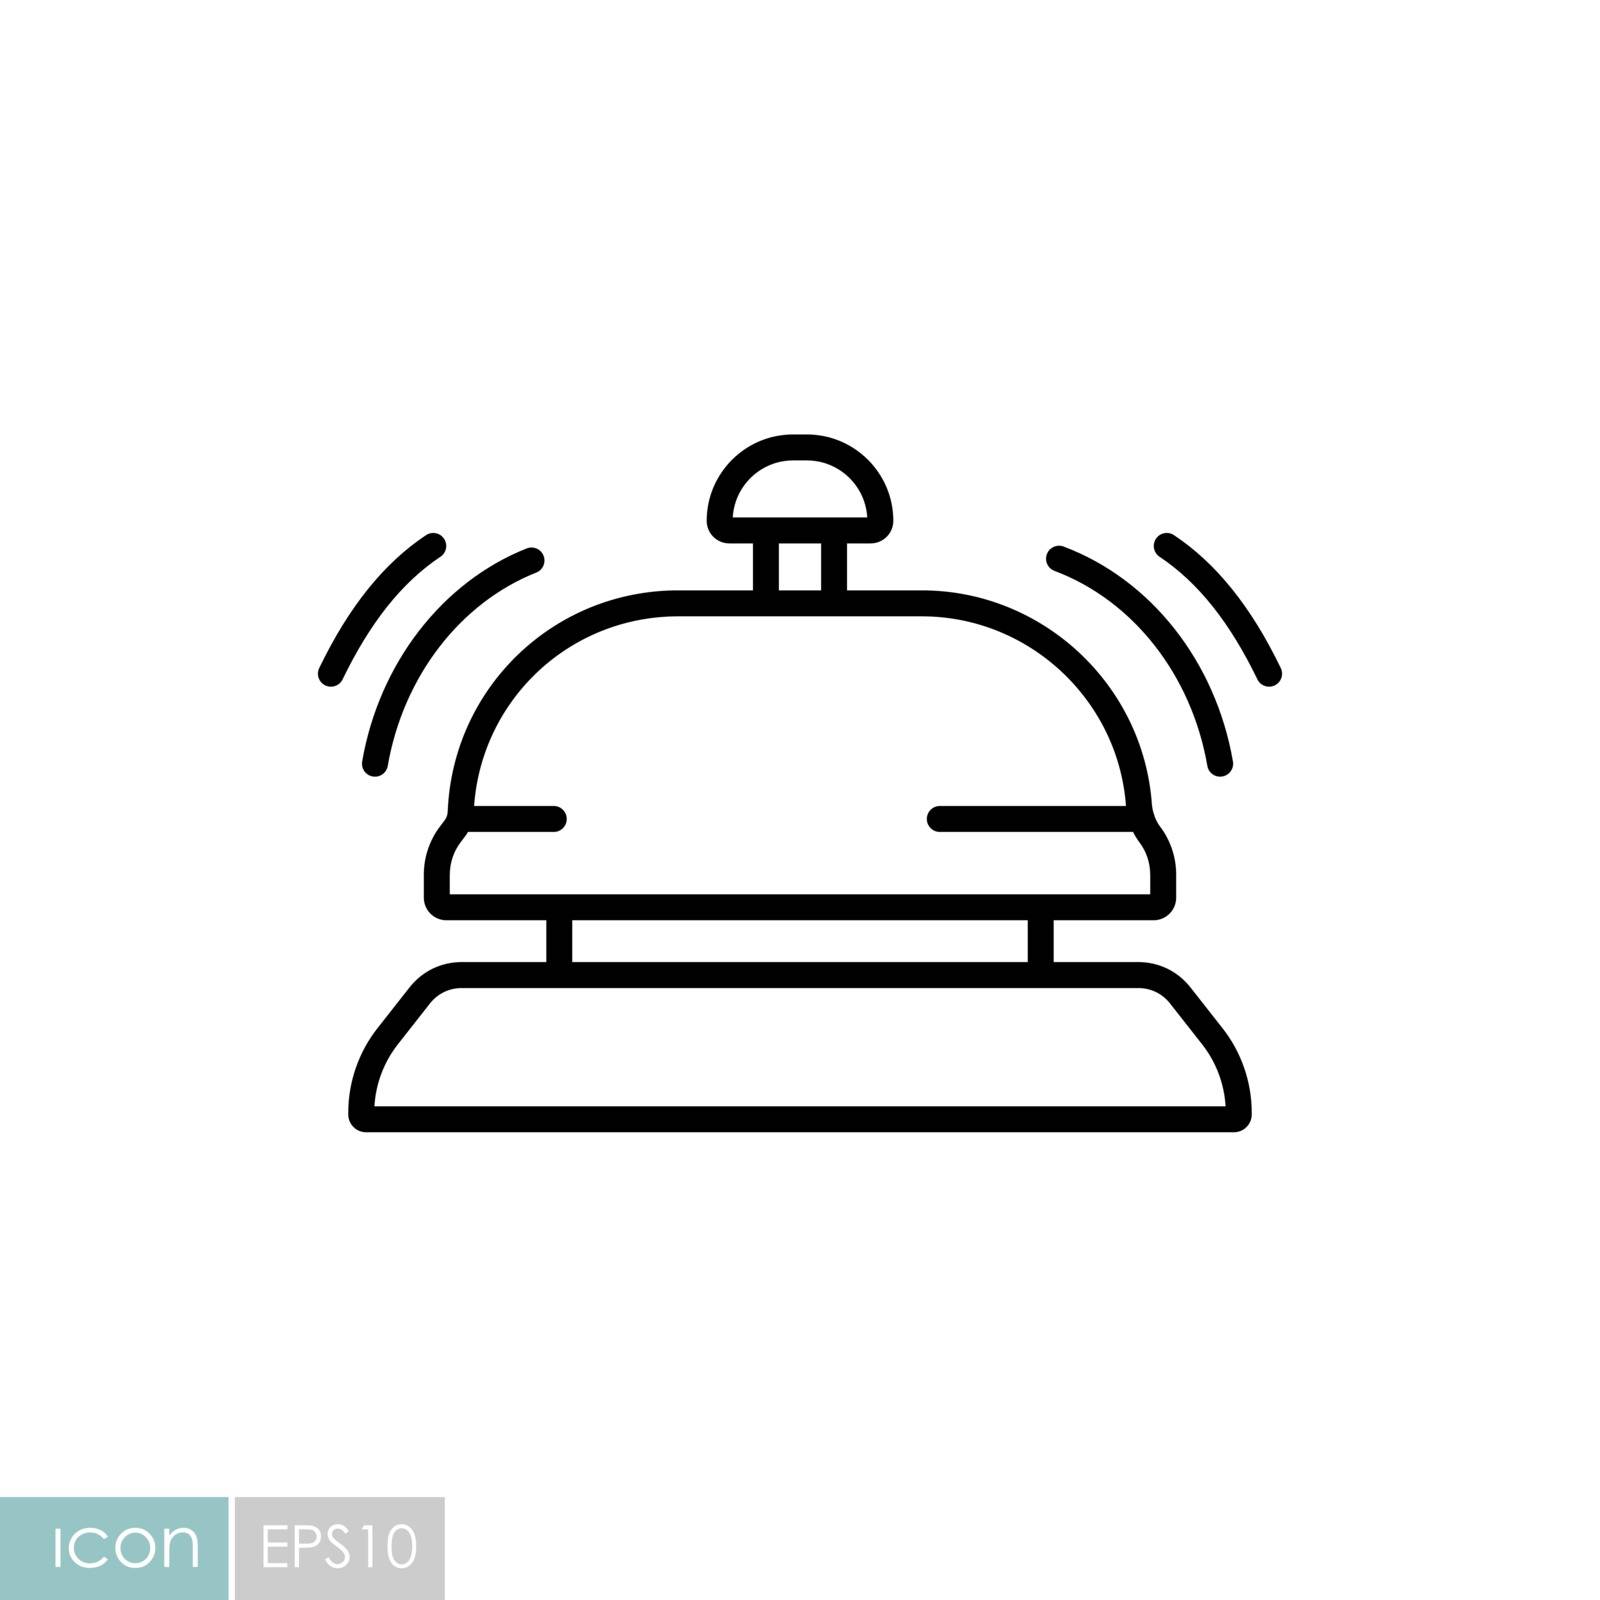 Counter bell, hotel, service vector icon. Graph symbol for travel and tourism web site and apps design, logo, app, UI